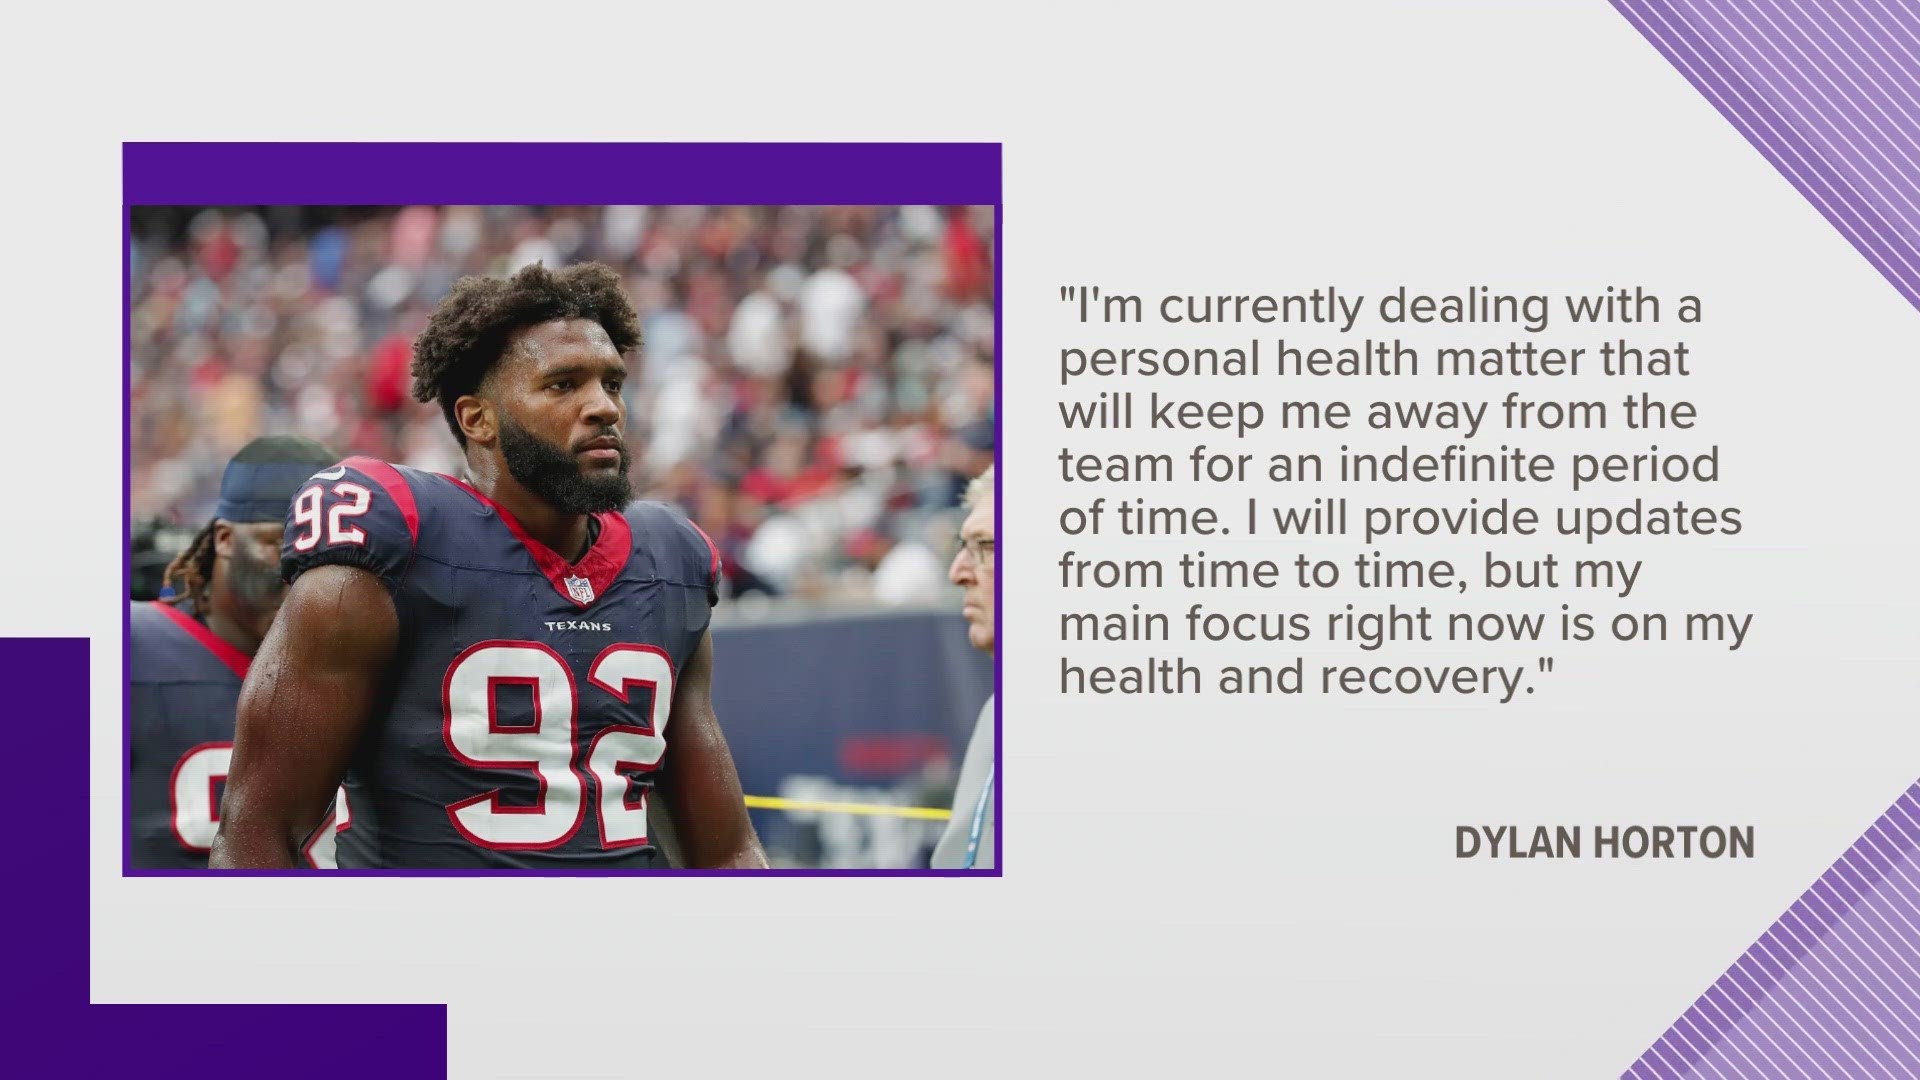 Horton released a statement through the Texans on Wednesday.